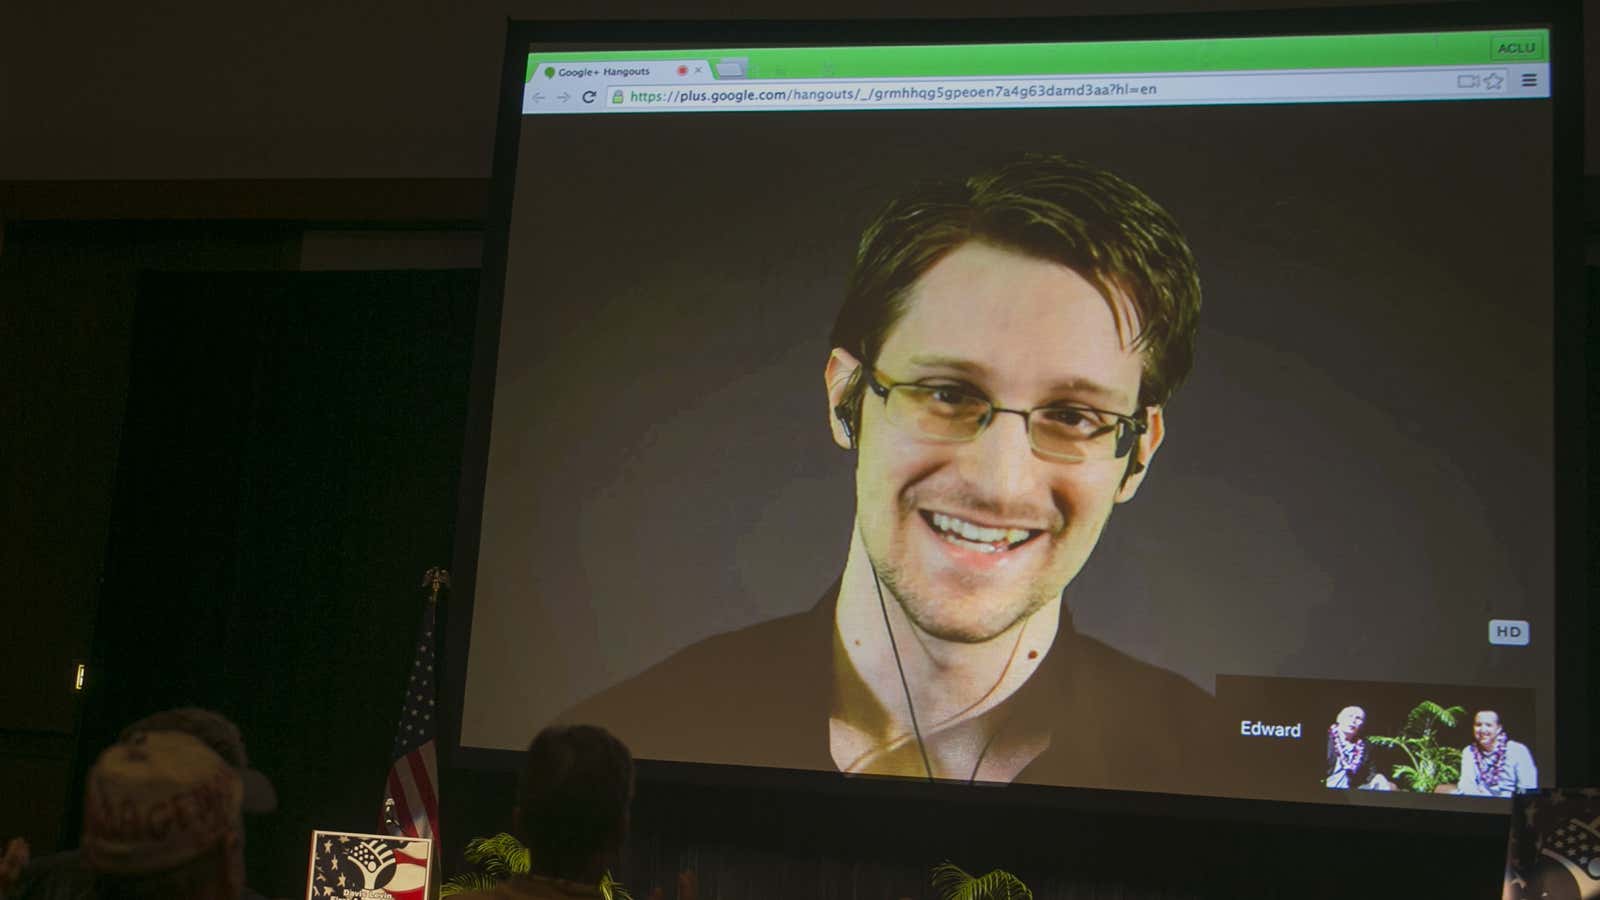 Does this mean Snowden will leave Russia?